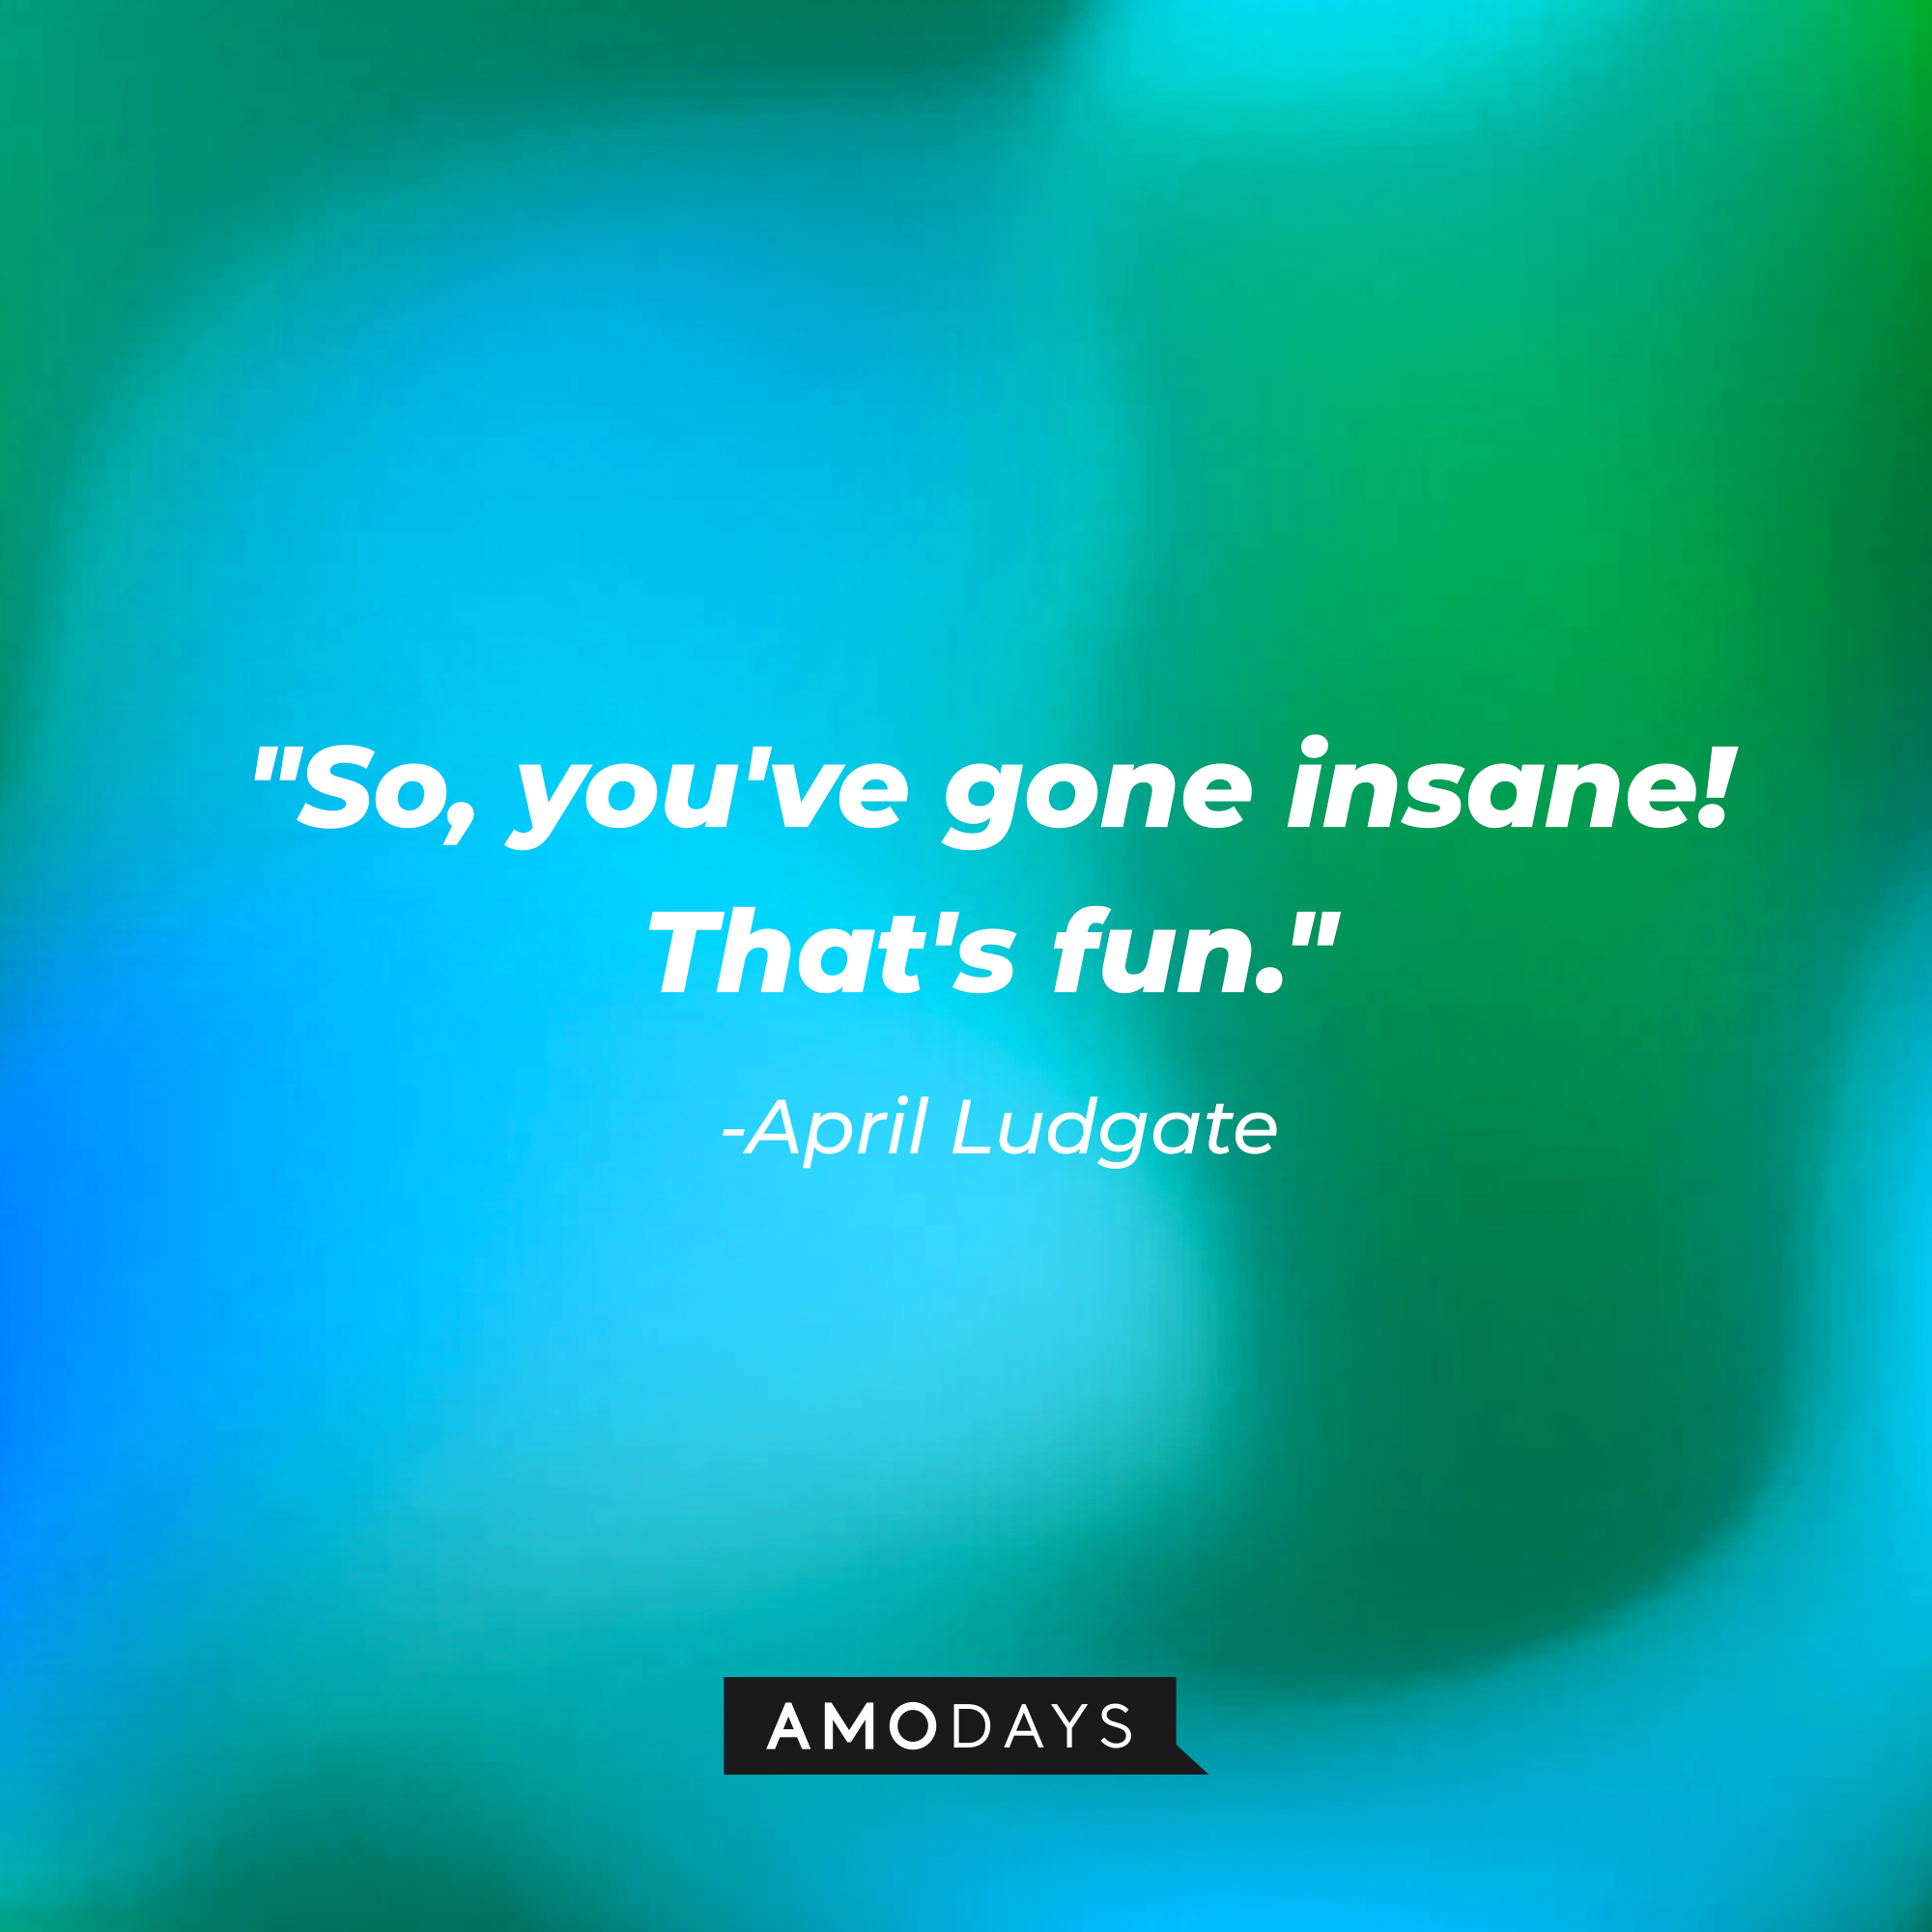 April Ludgate's quote, "So, you've gone insane! That's fun." | Source: AmoDays